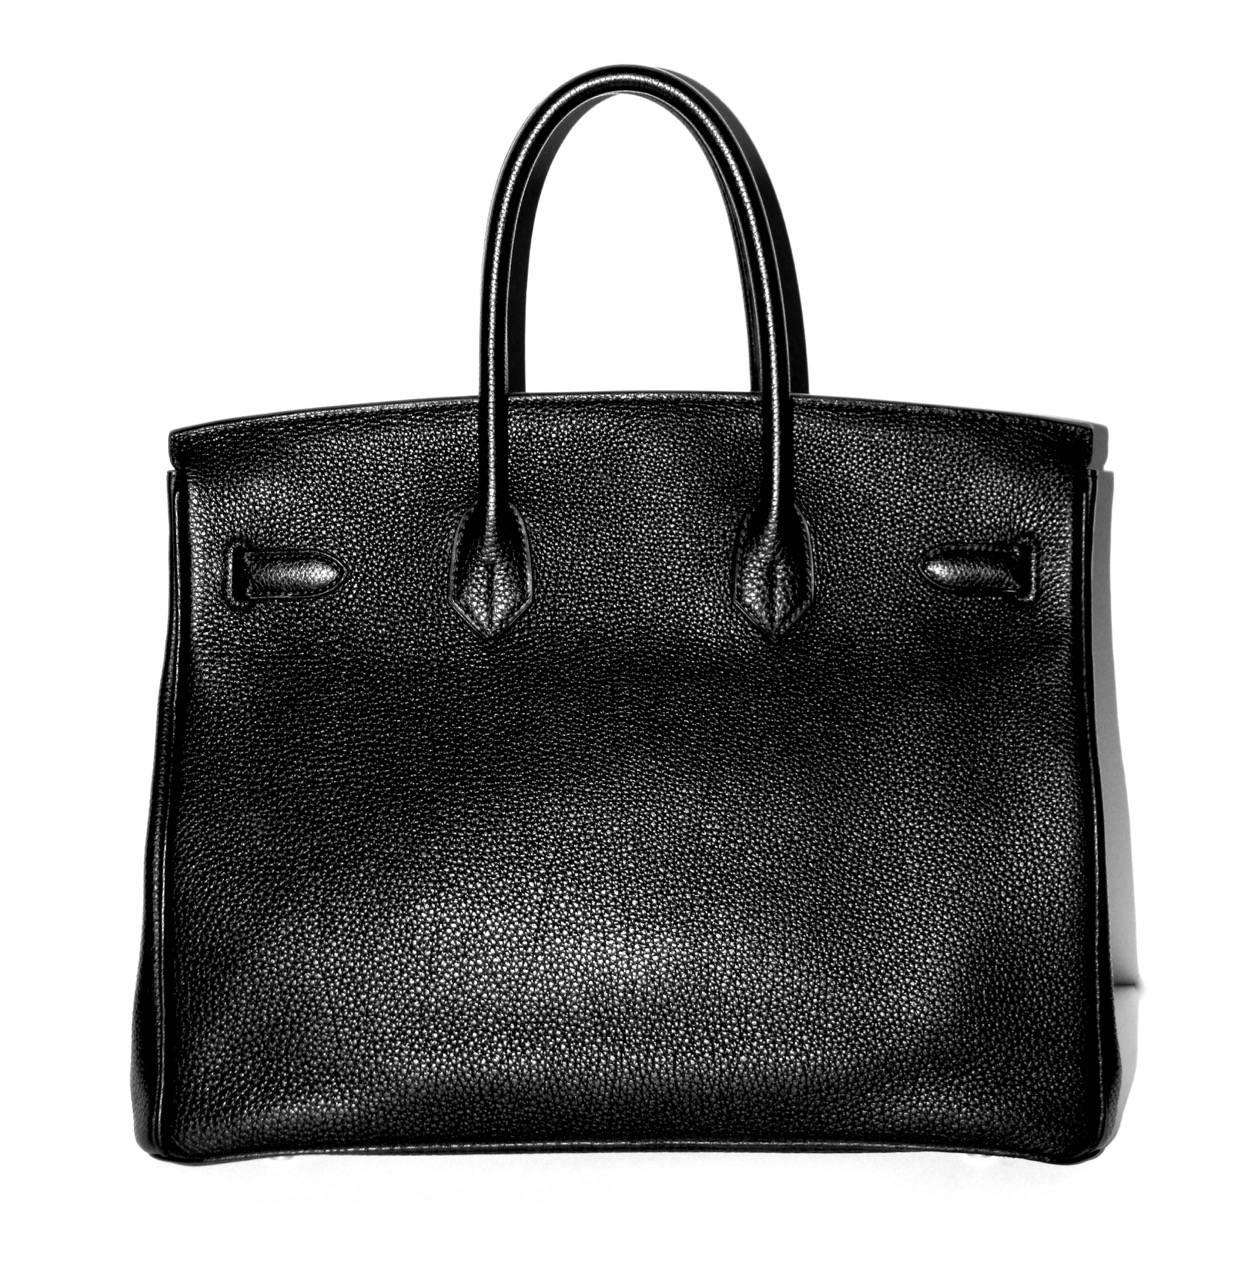 Collection: 2008
Leather: Togo
Color: Black
Hardware: Palladium
Measurements: L 35 cm x H 26 cm x D 18 cm
Condition: Excellent, like new
Comes with: Dust bag
Letter: L in a square

All items sold by la Bourse du Luxe are subject to a strict quality